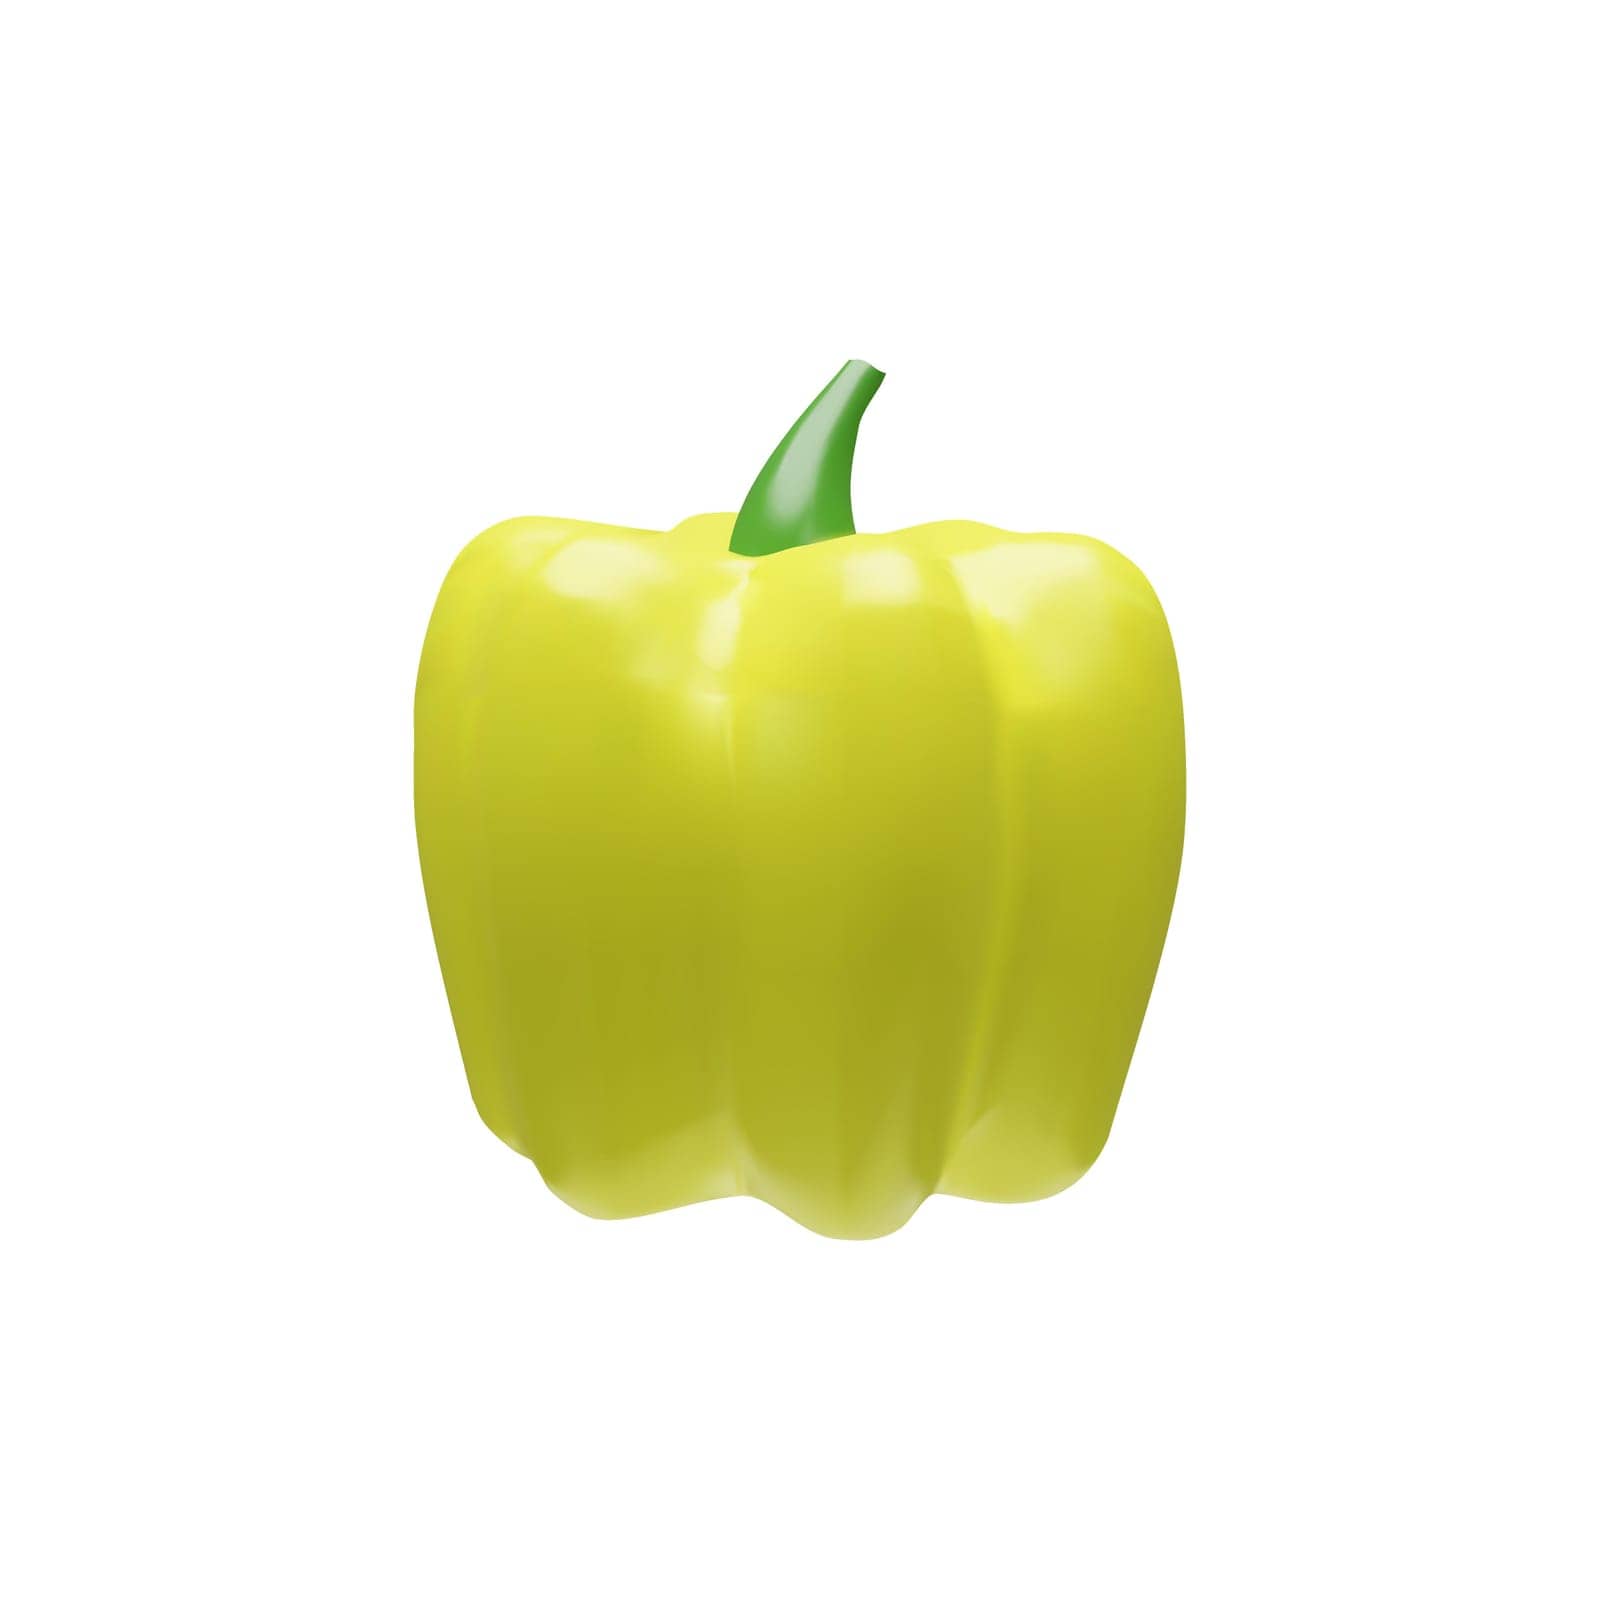 3D render green bell pepper. Realistic whole paprika. Tasty fresh ingredient for Asian, Mexican, Bulgarian food. Healthy organic vitamin vegetable. Vector illustration about sweet object